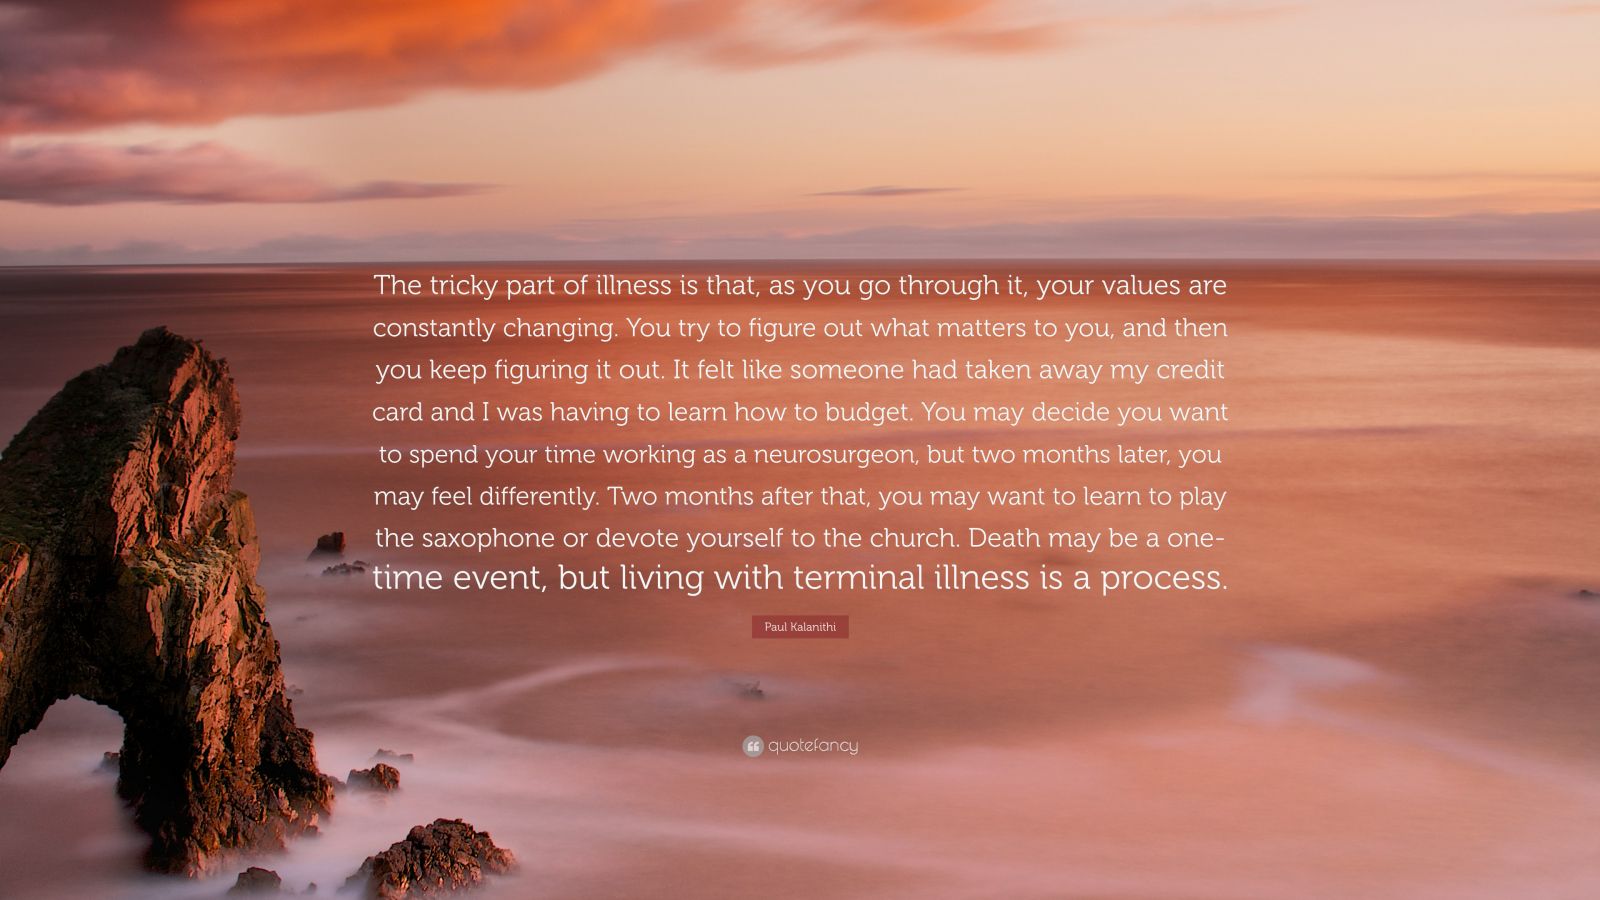 Paul Kalanithi Quote: “The tricky part of illness is that, as you go